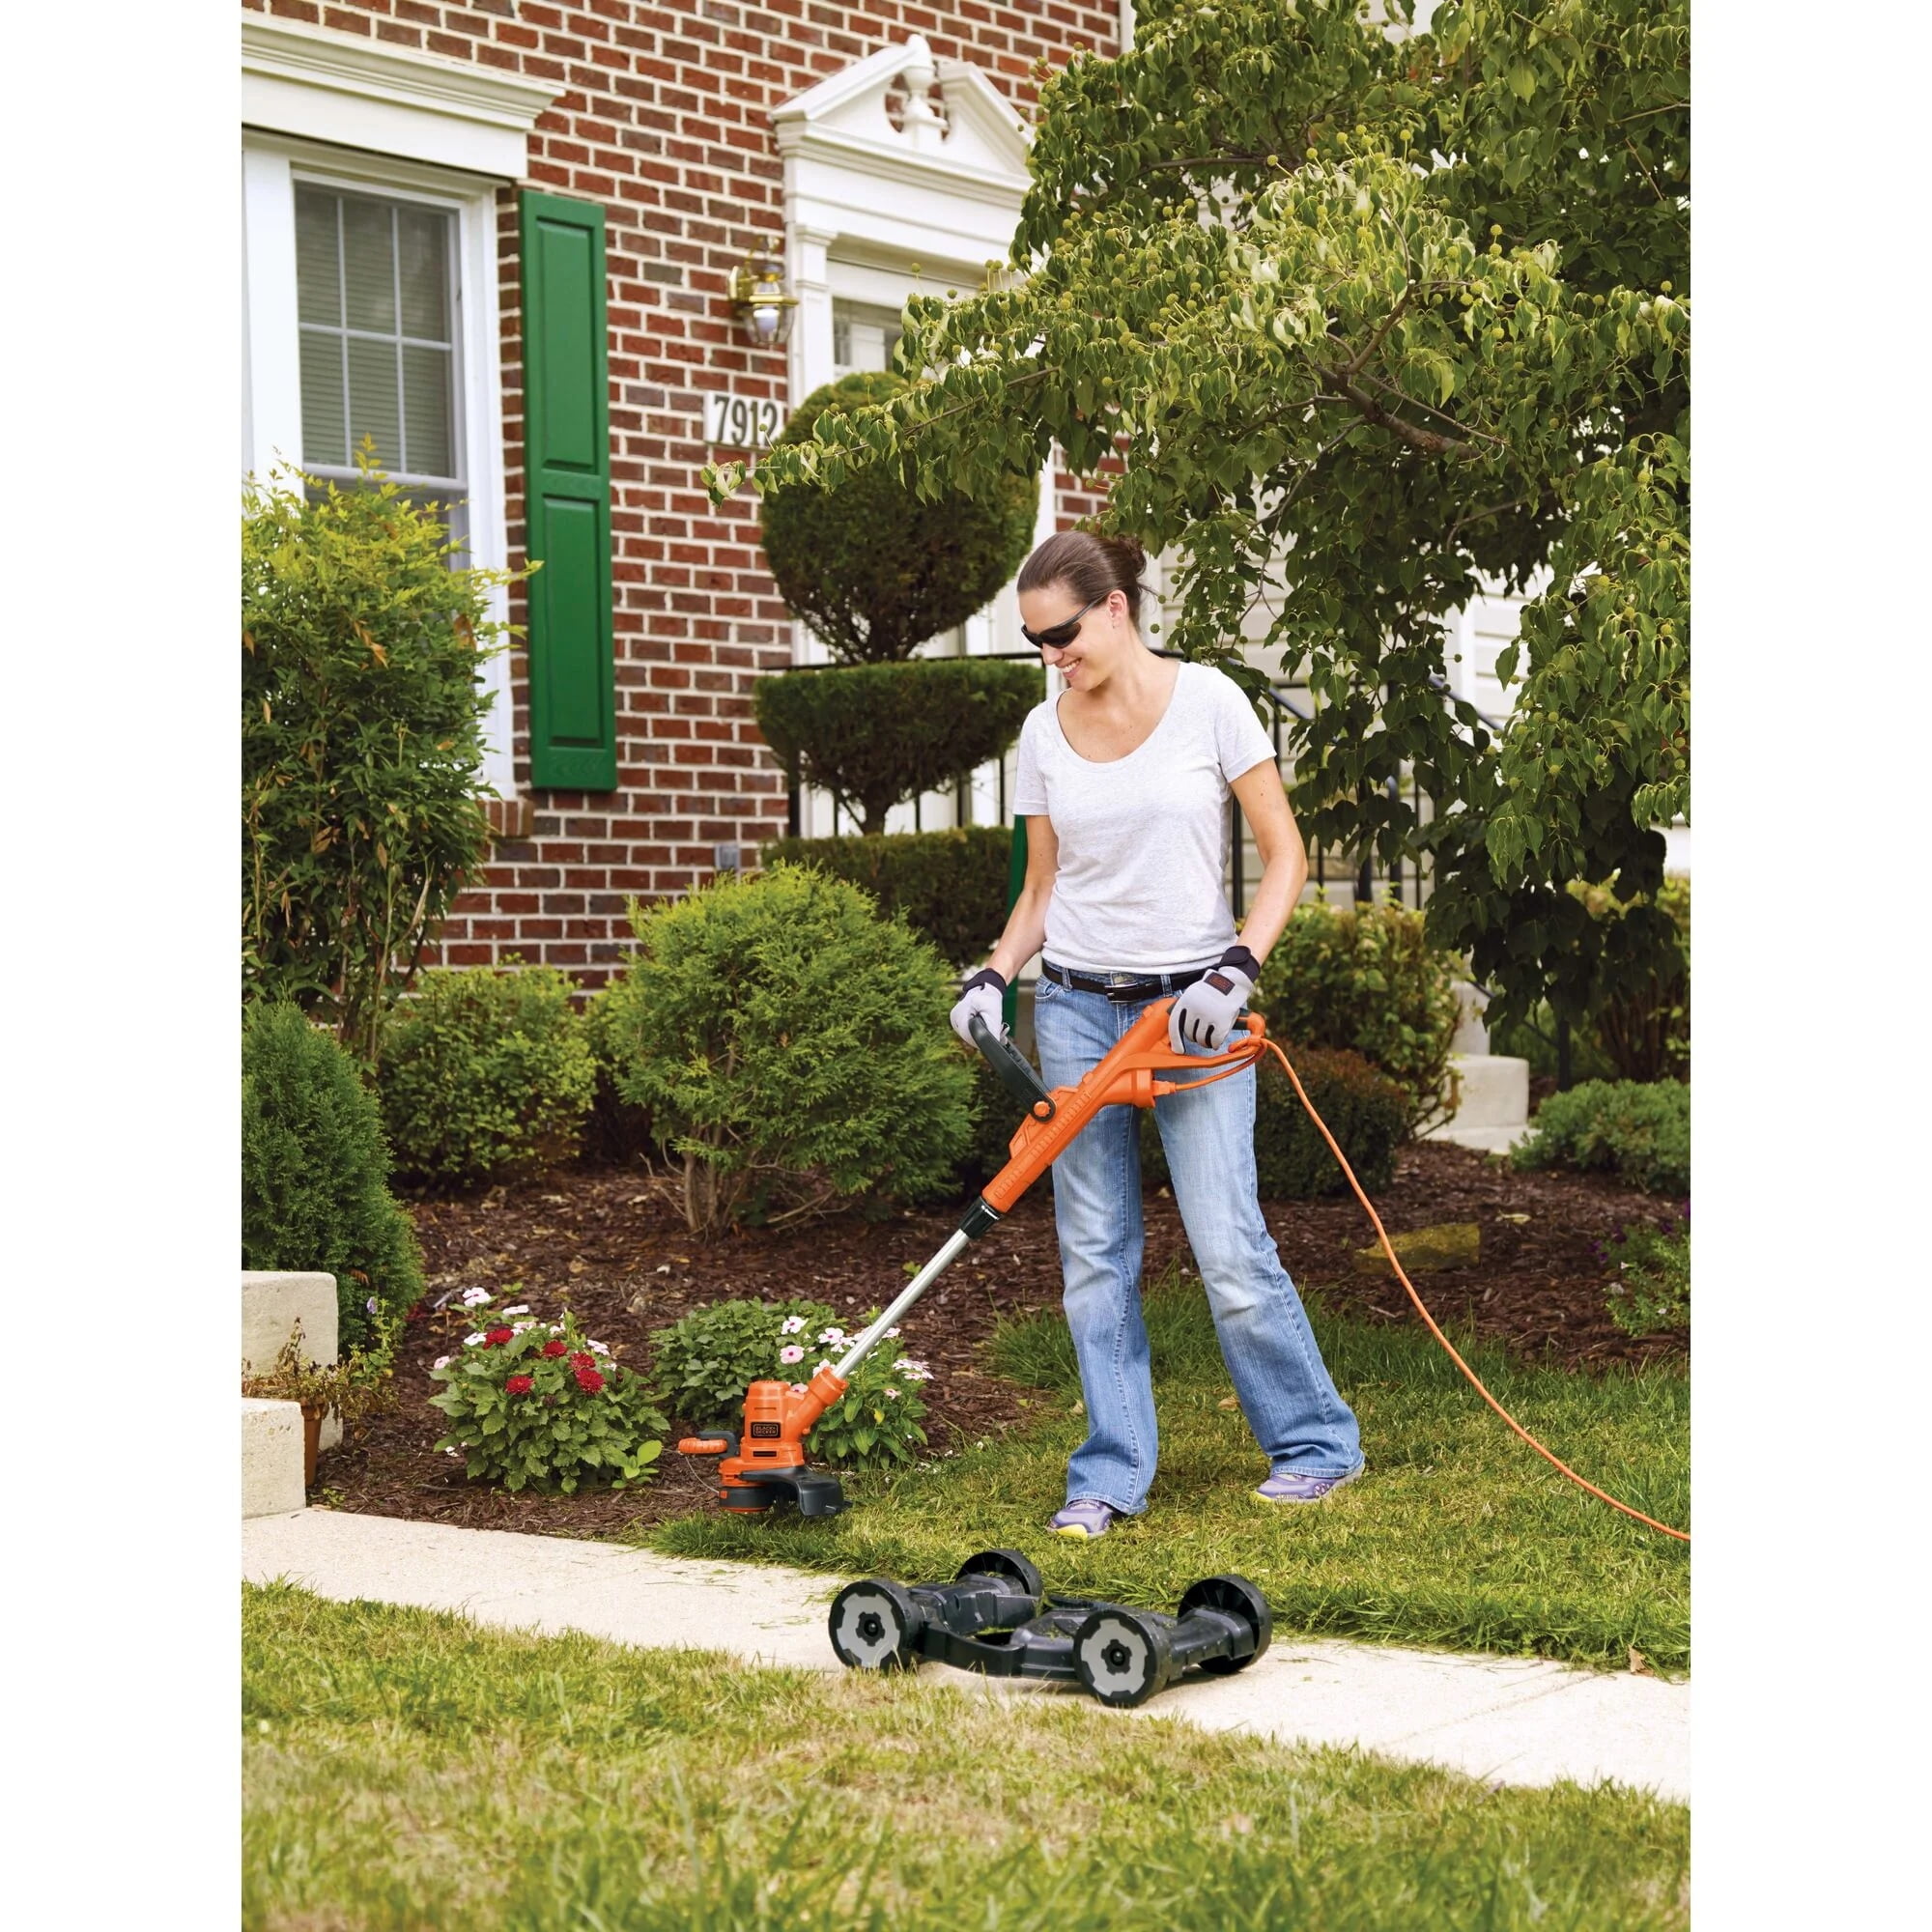 New Black & Decker MTE912 12-Inch Electric 3-in-1 Trimmer/Edger and Mower Corded .#gh45843 3468-T34562FD607764